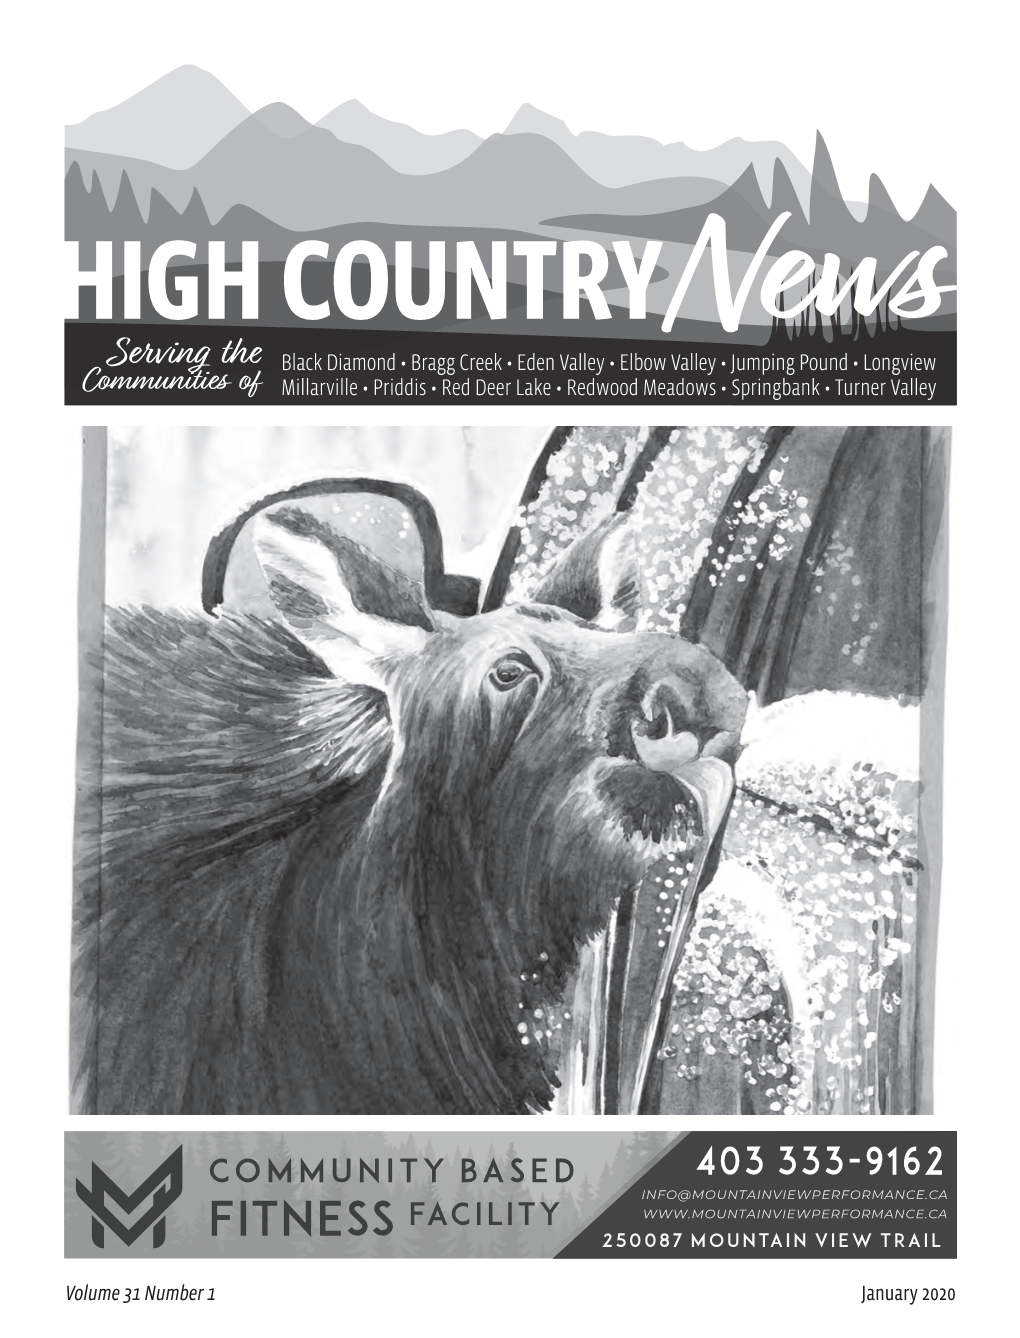 January 2020 2 High Country News • January 2020 Volume 31 Number 1 • January 2020 HIGH COUNTRY NEWS Is Published Monthly By: High Country Business Services Ltd